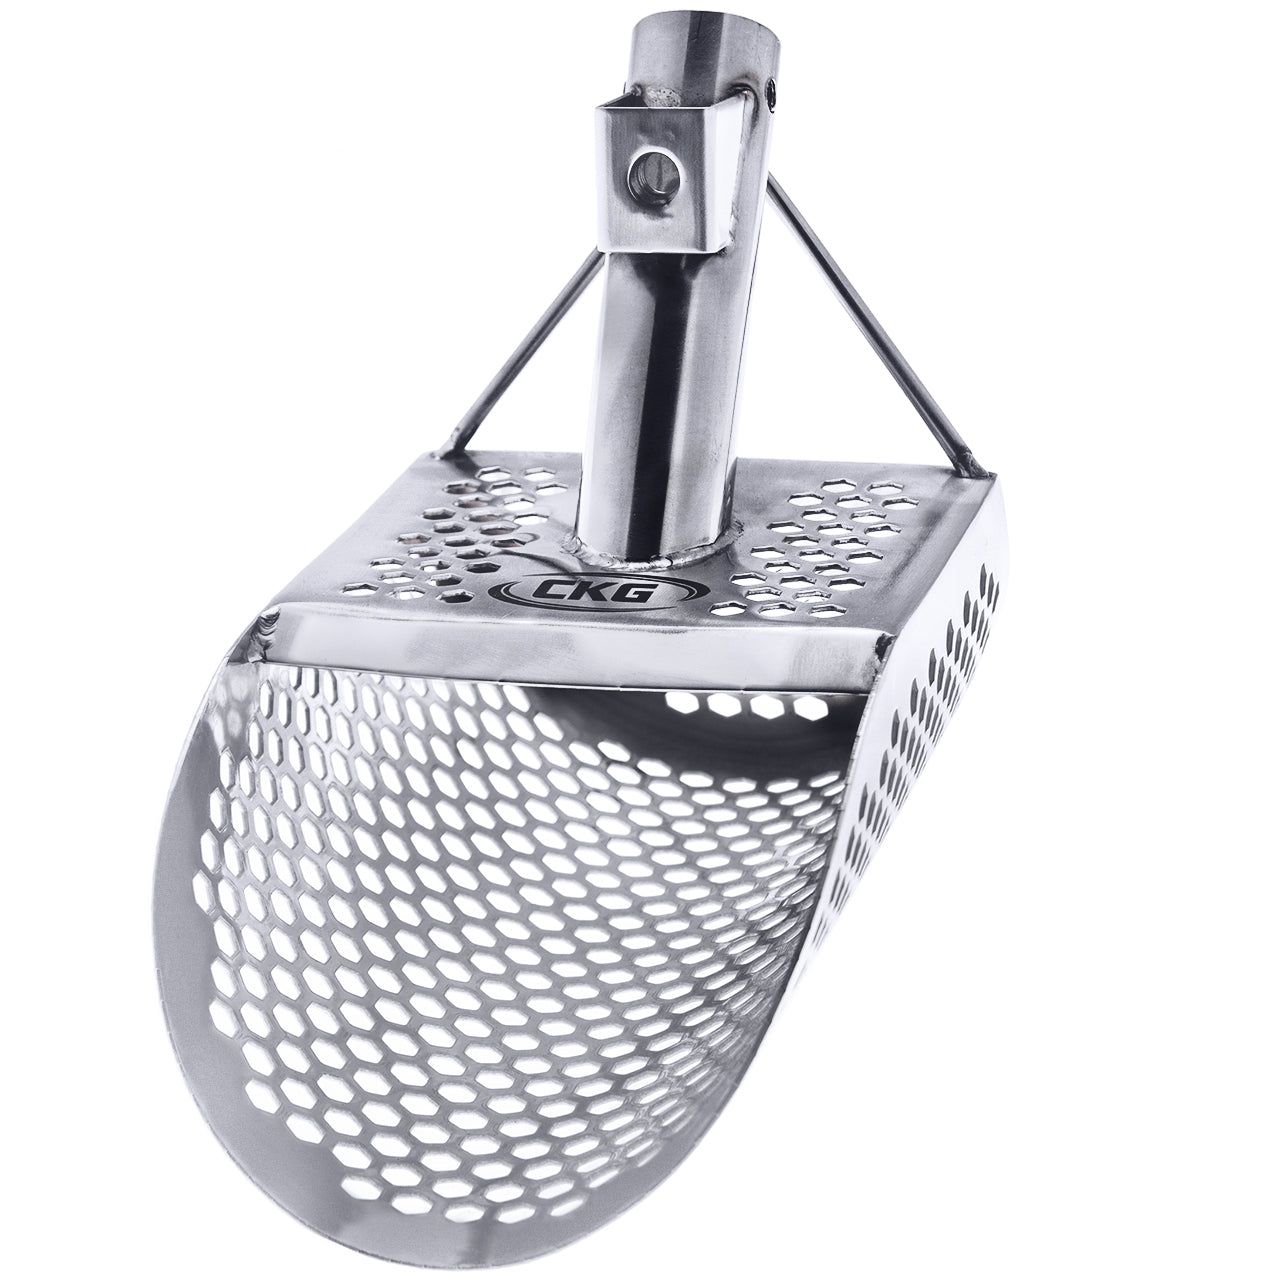 CKG 9 X 6 Sand Scoops Metal Detecting Shovel Sifter Scoop Stainless St –  ckgscoop